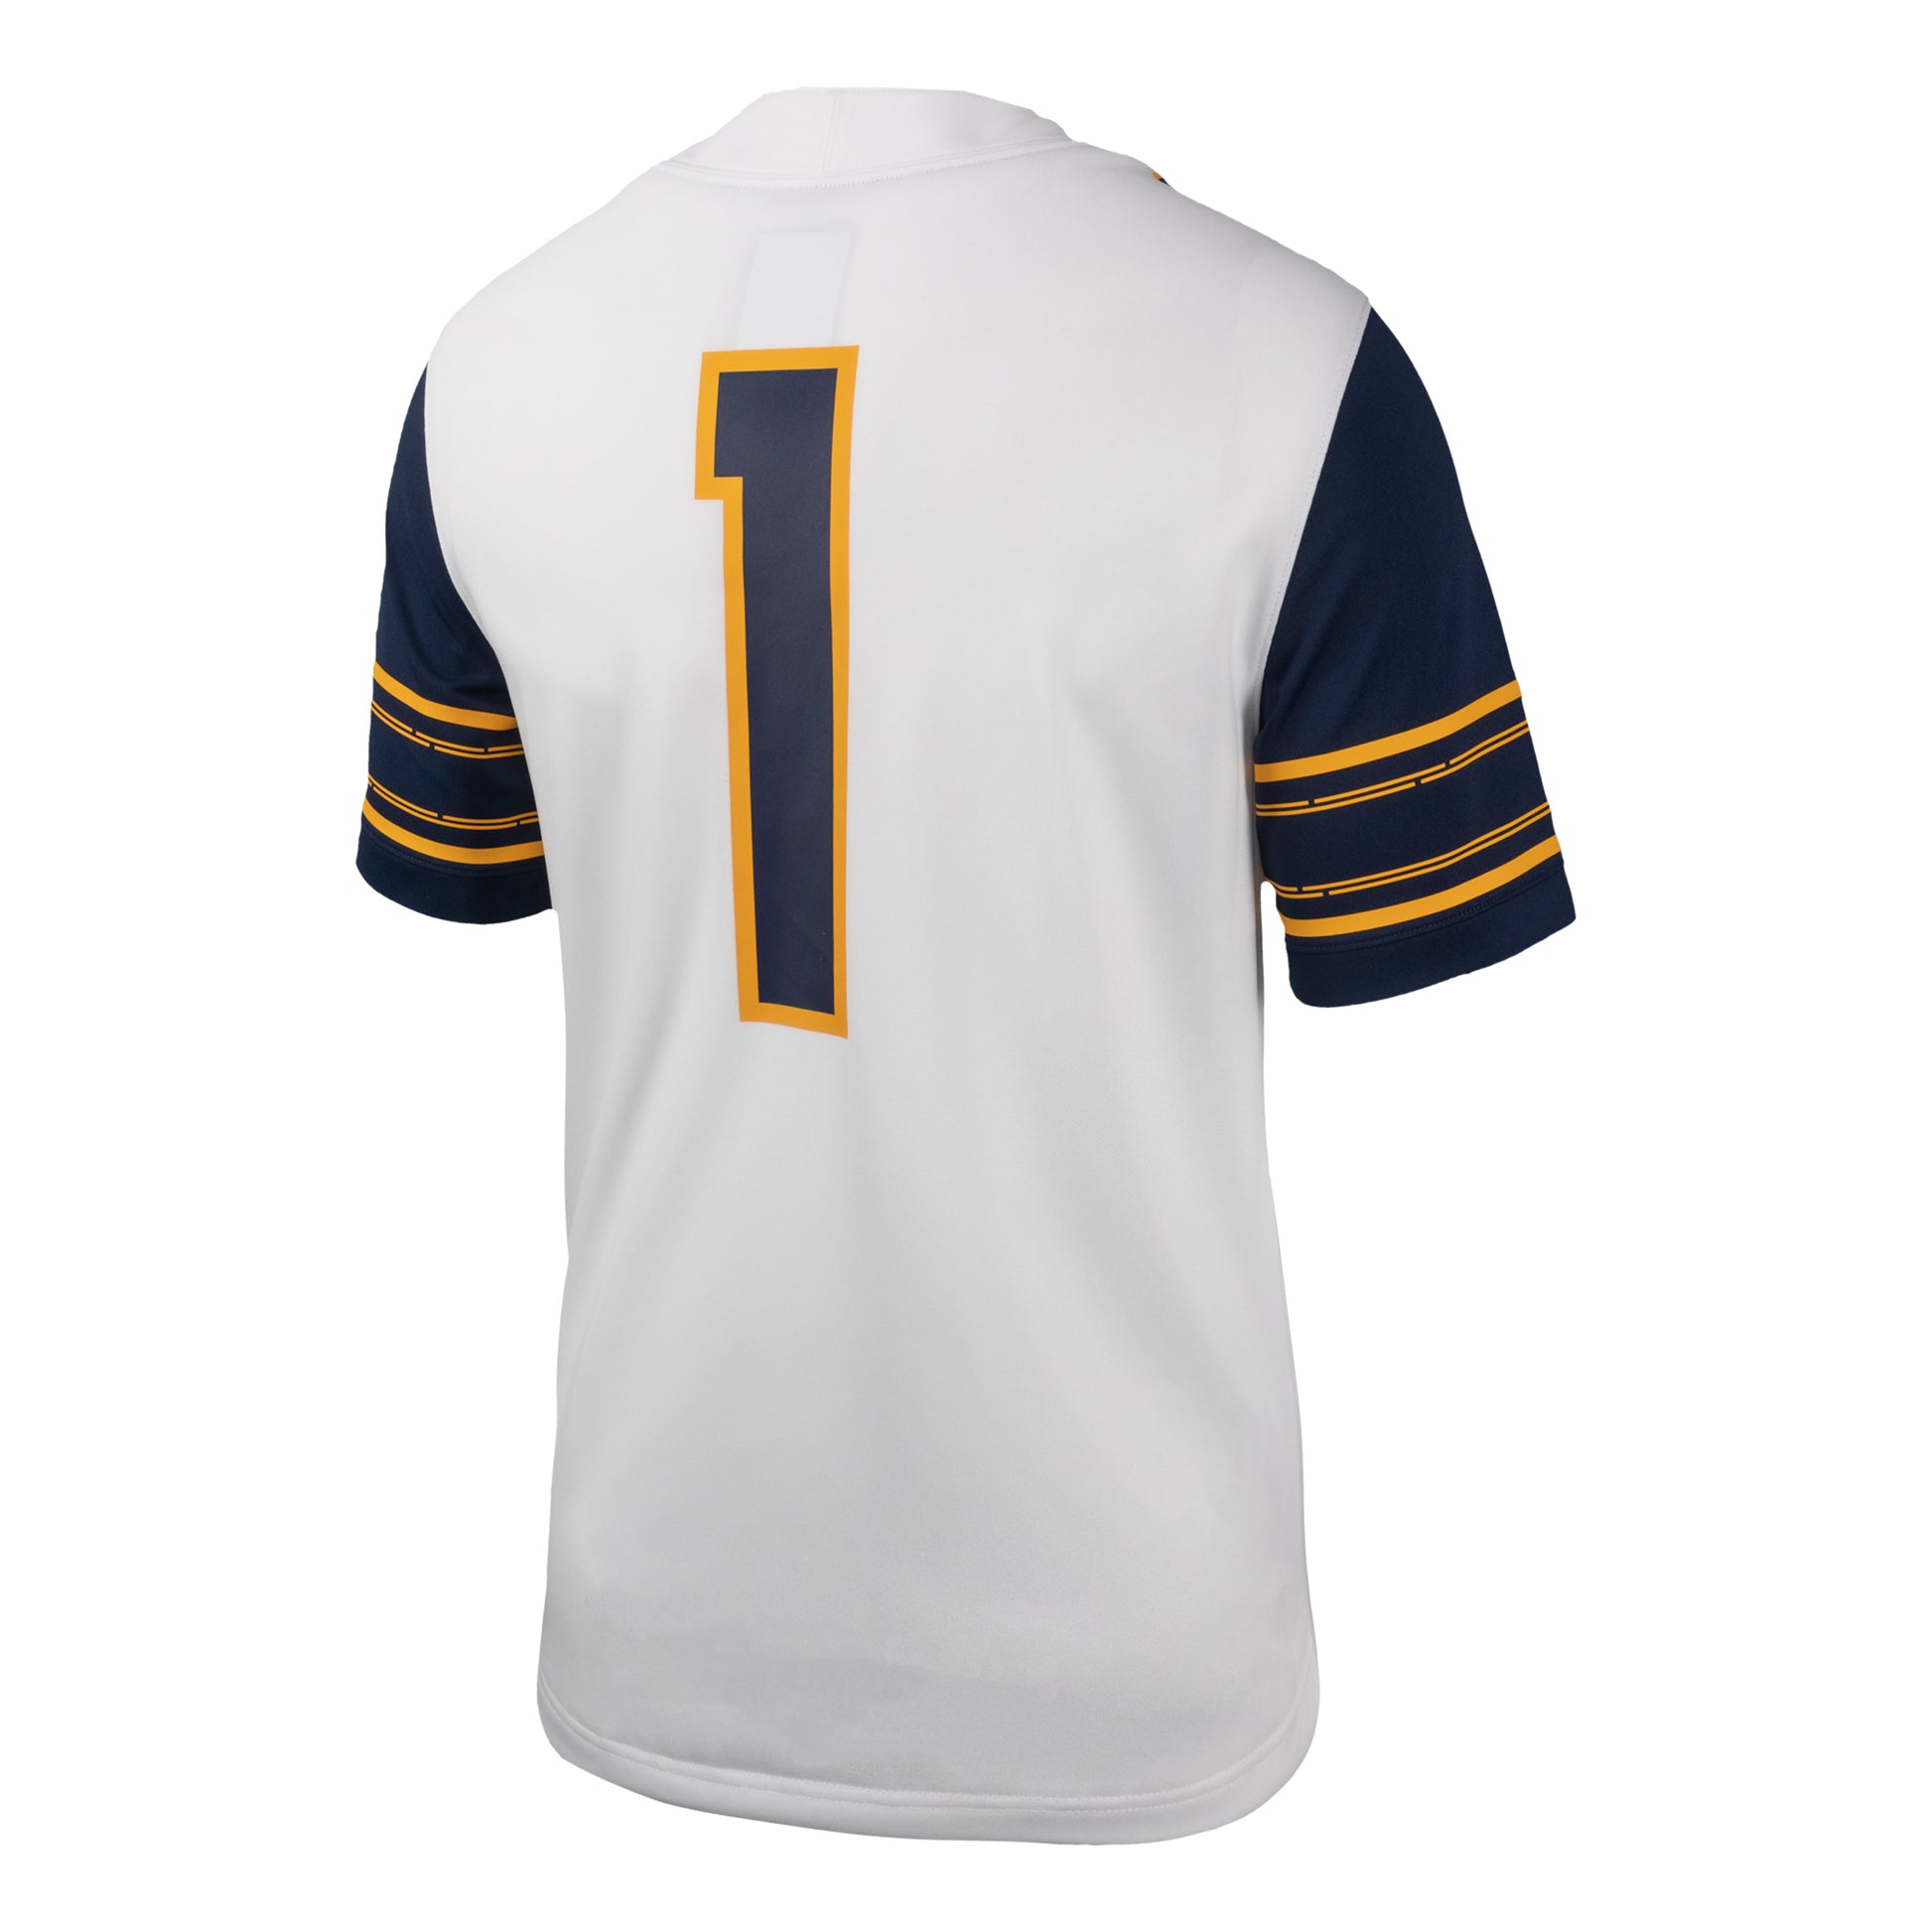 Los Angeles Rams Jersey for Stuffed Animals